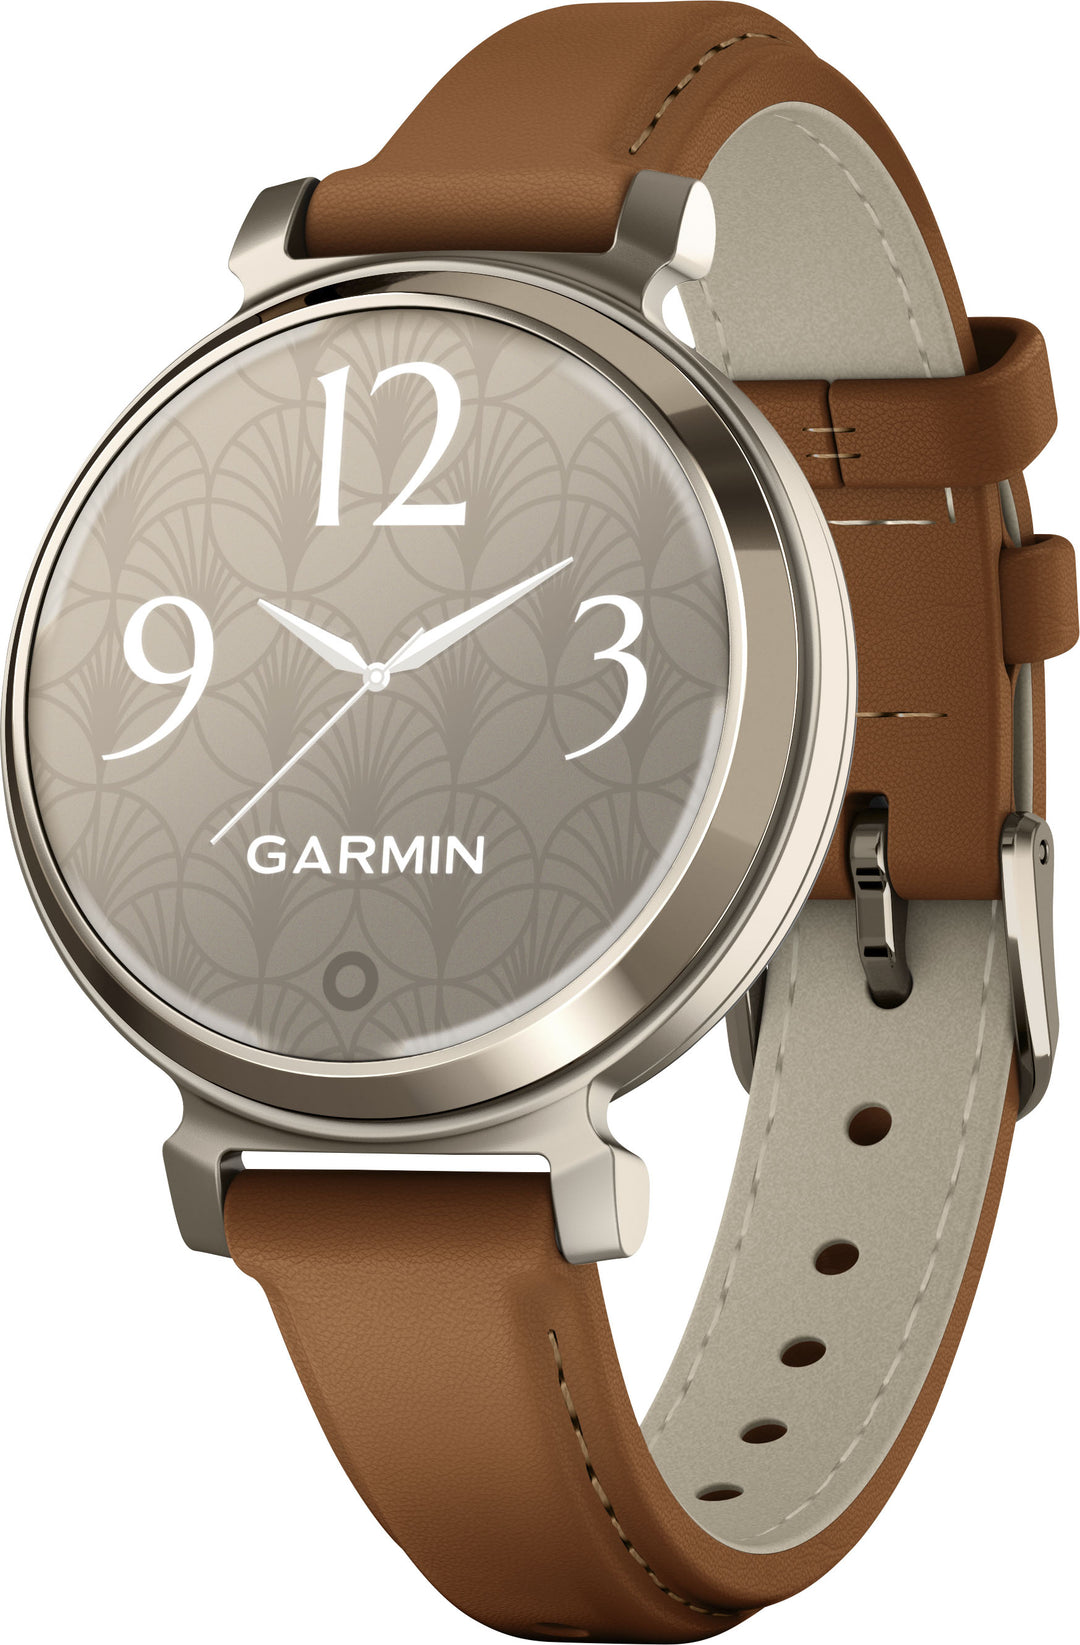 Garmin - Lily 2 Classic Smartwatch 34 mm Anodized Aluminum - Cream Gold with Tan Leather Band_0